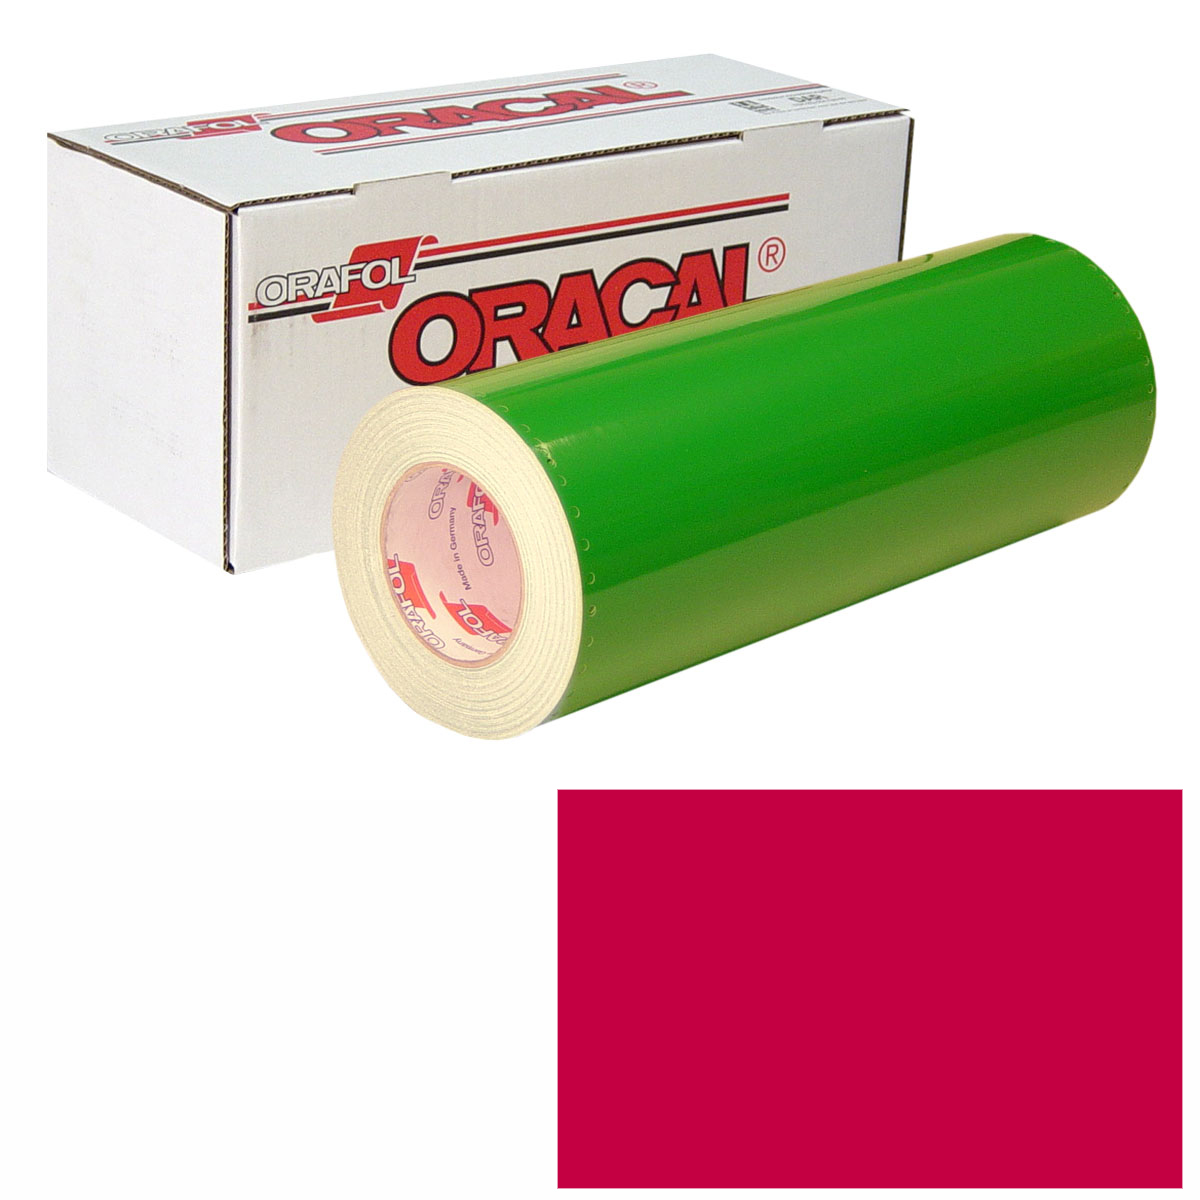 ORACAL 951 30in X 10yd 031 Red